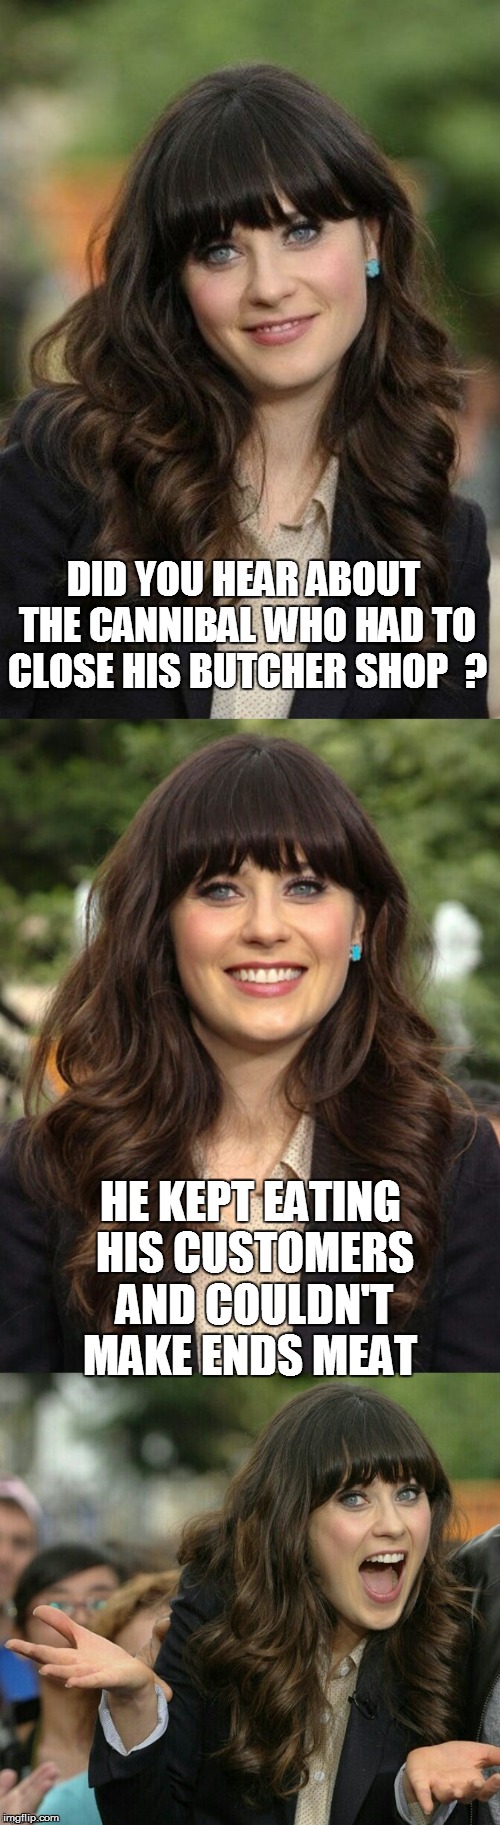 Zooey Deschanel joke template | DID YOU HEAR ABOUT THE CANNIBAL WHO HAD TO CLOSE HIS BUTCHER SHOP  ? HE KEPT EATING HIS CUSTOMERS AND COULDN'T MAKE ENDS MEAT | image tagged in zooey deschanel joke template | made w/ Imgflip meme maker